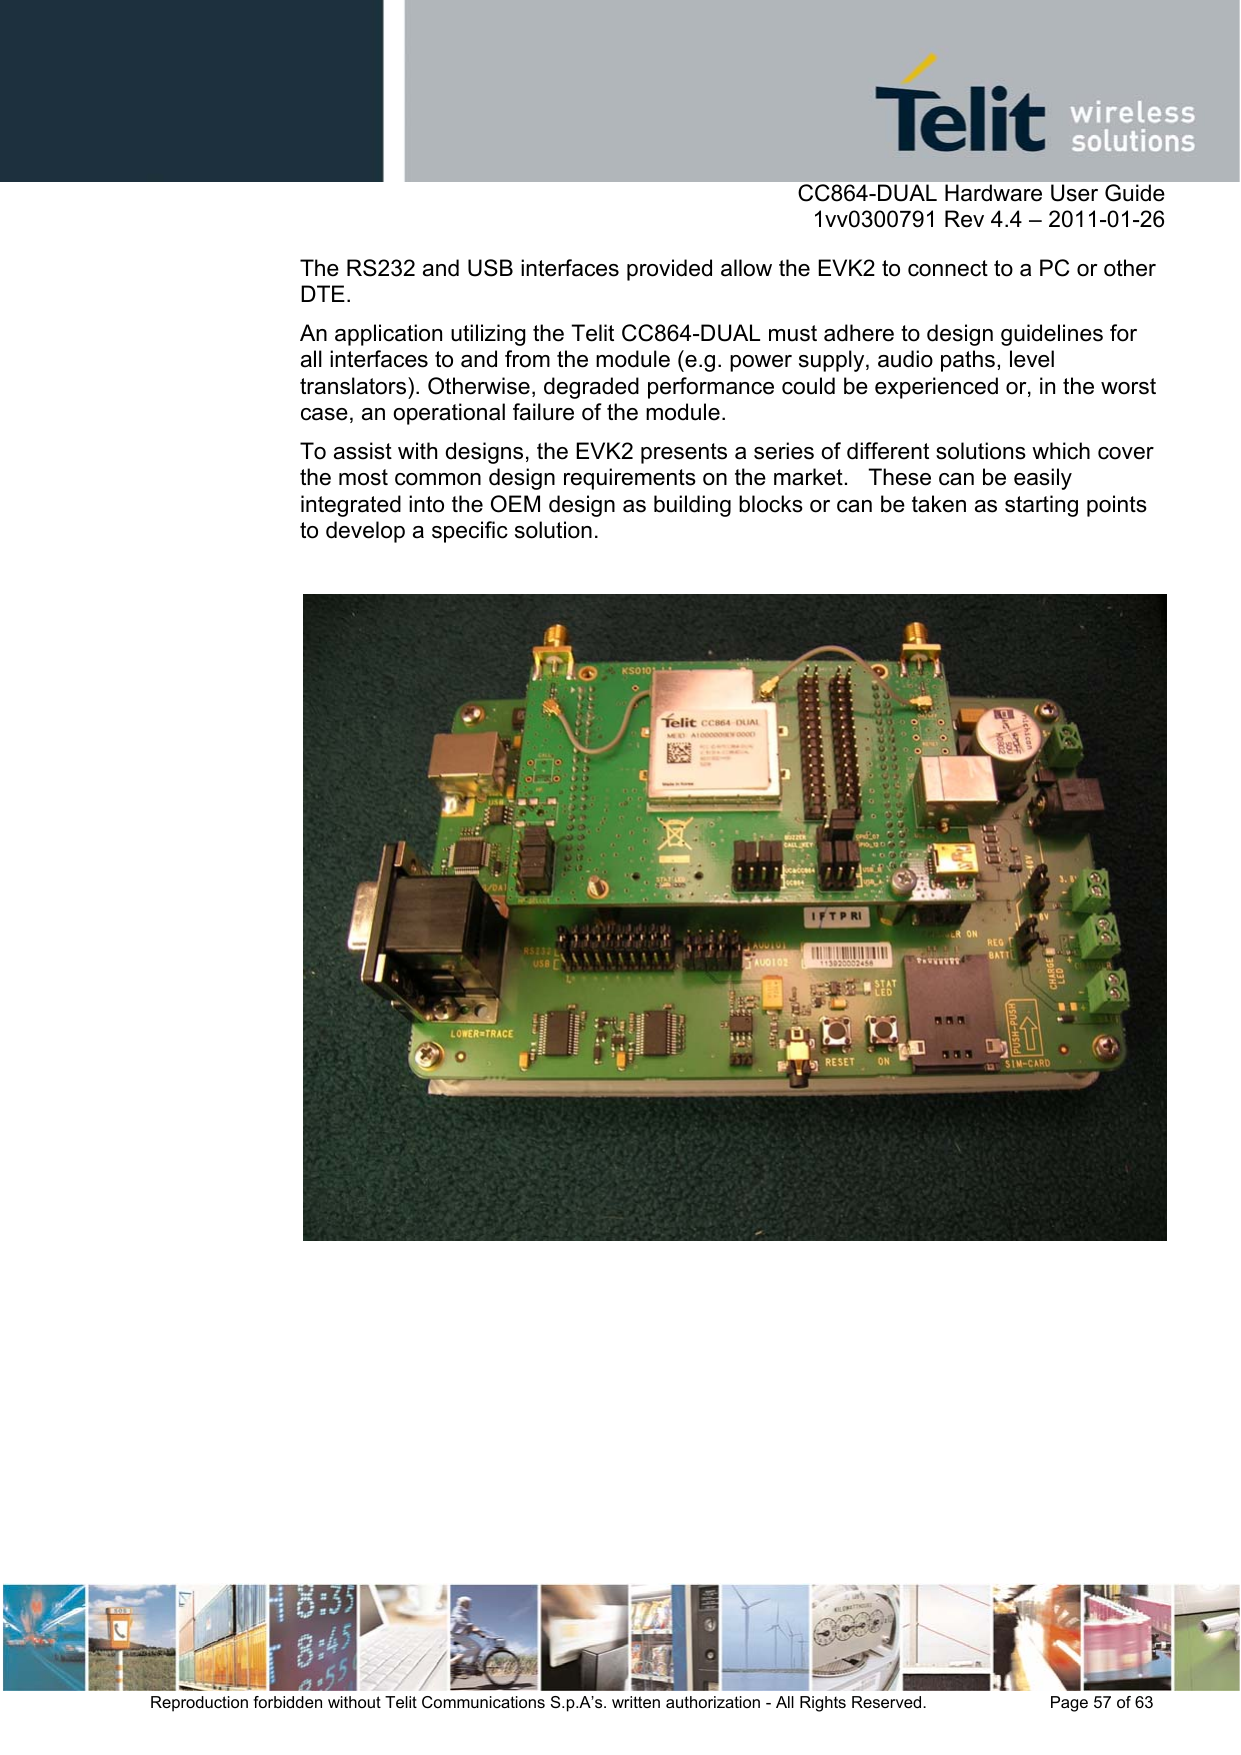      CC864-DUAL Hardware User Guide    1vv0300791 Rev 4.4 – 2011-01-26  Reproduction forbidden without Telit Communications S.p.A’s. written authorization - All Rights Reserved.    Page 57 of 63  The RS232 and USB interfaces provided allow the EVK2 to connect to a PC or other DTE. An application utilizing the Telit CC864-DUAL must adhere to design guidelines for all interfaces to and from the module (e.g. power supply, audio paths, level translators). Otherwise, degraded performance could be experienced or, in the worst case, an operational failure of the module.  To assist with designs, the EVK2 presents a series of different solutions which cover the most common design requirements on the market.   These can be easily integrated into the OEM design as building blocks or can be taken as starting points to develop a specific solution.   